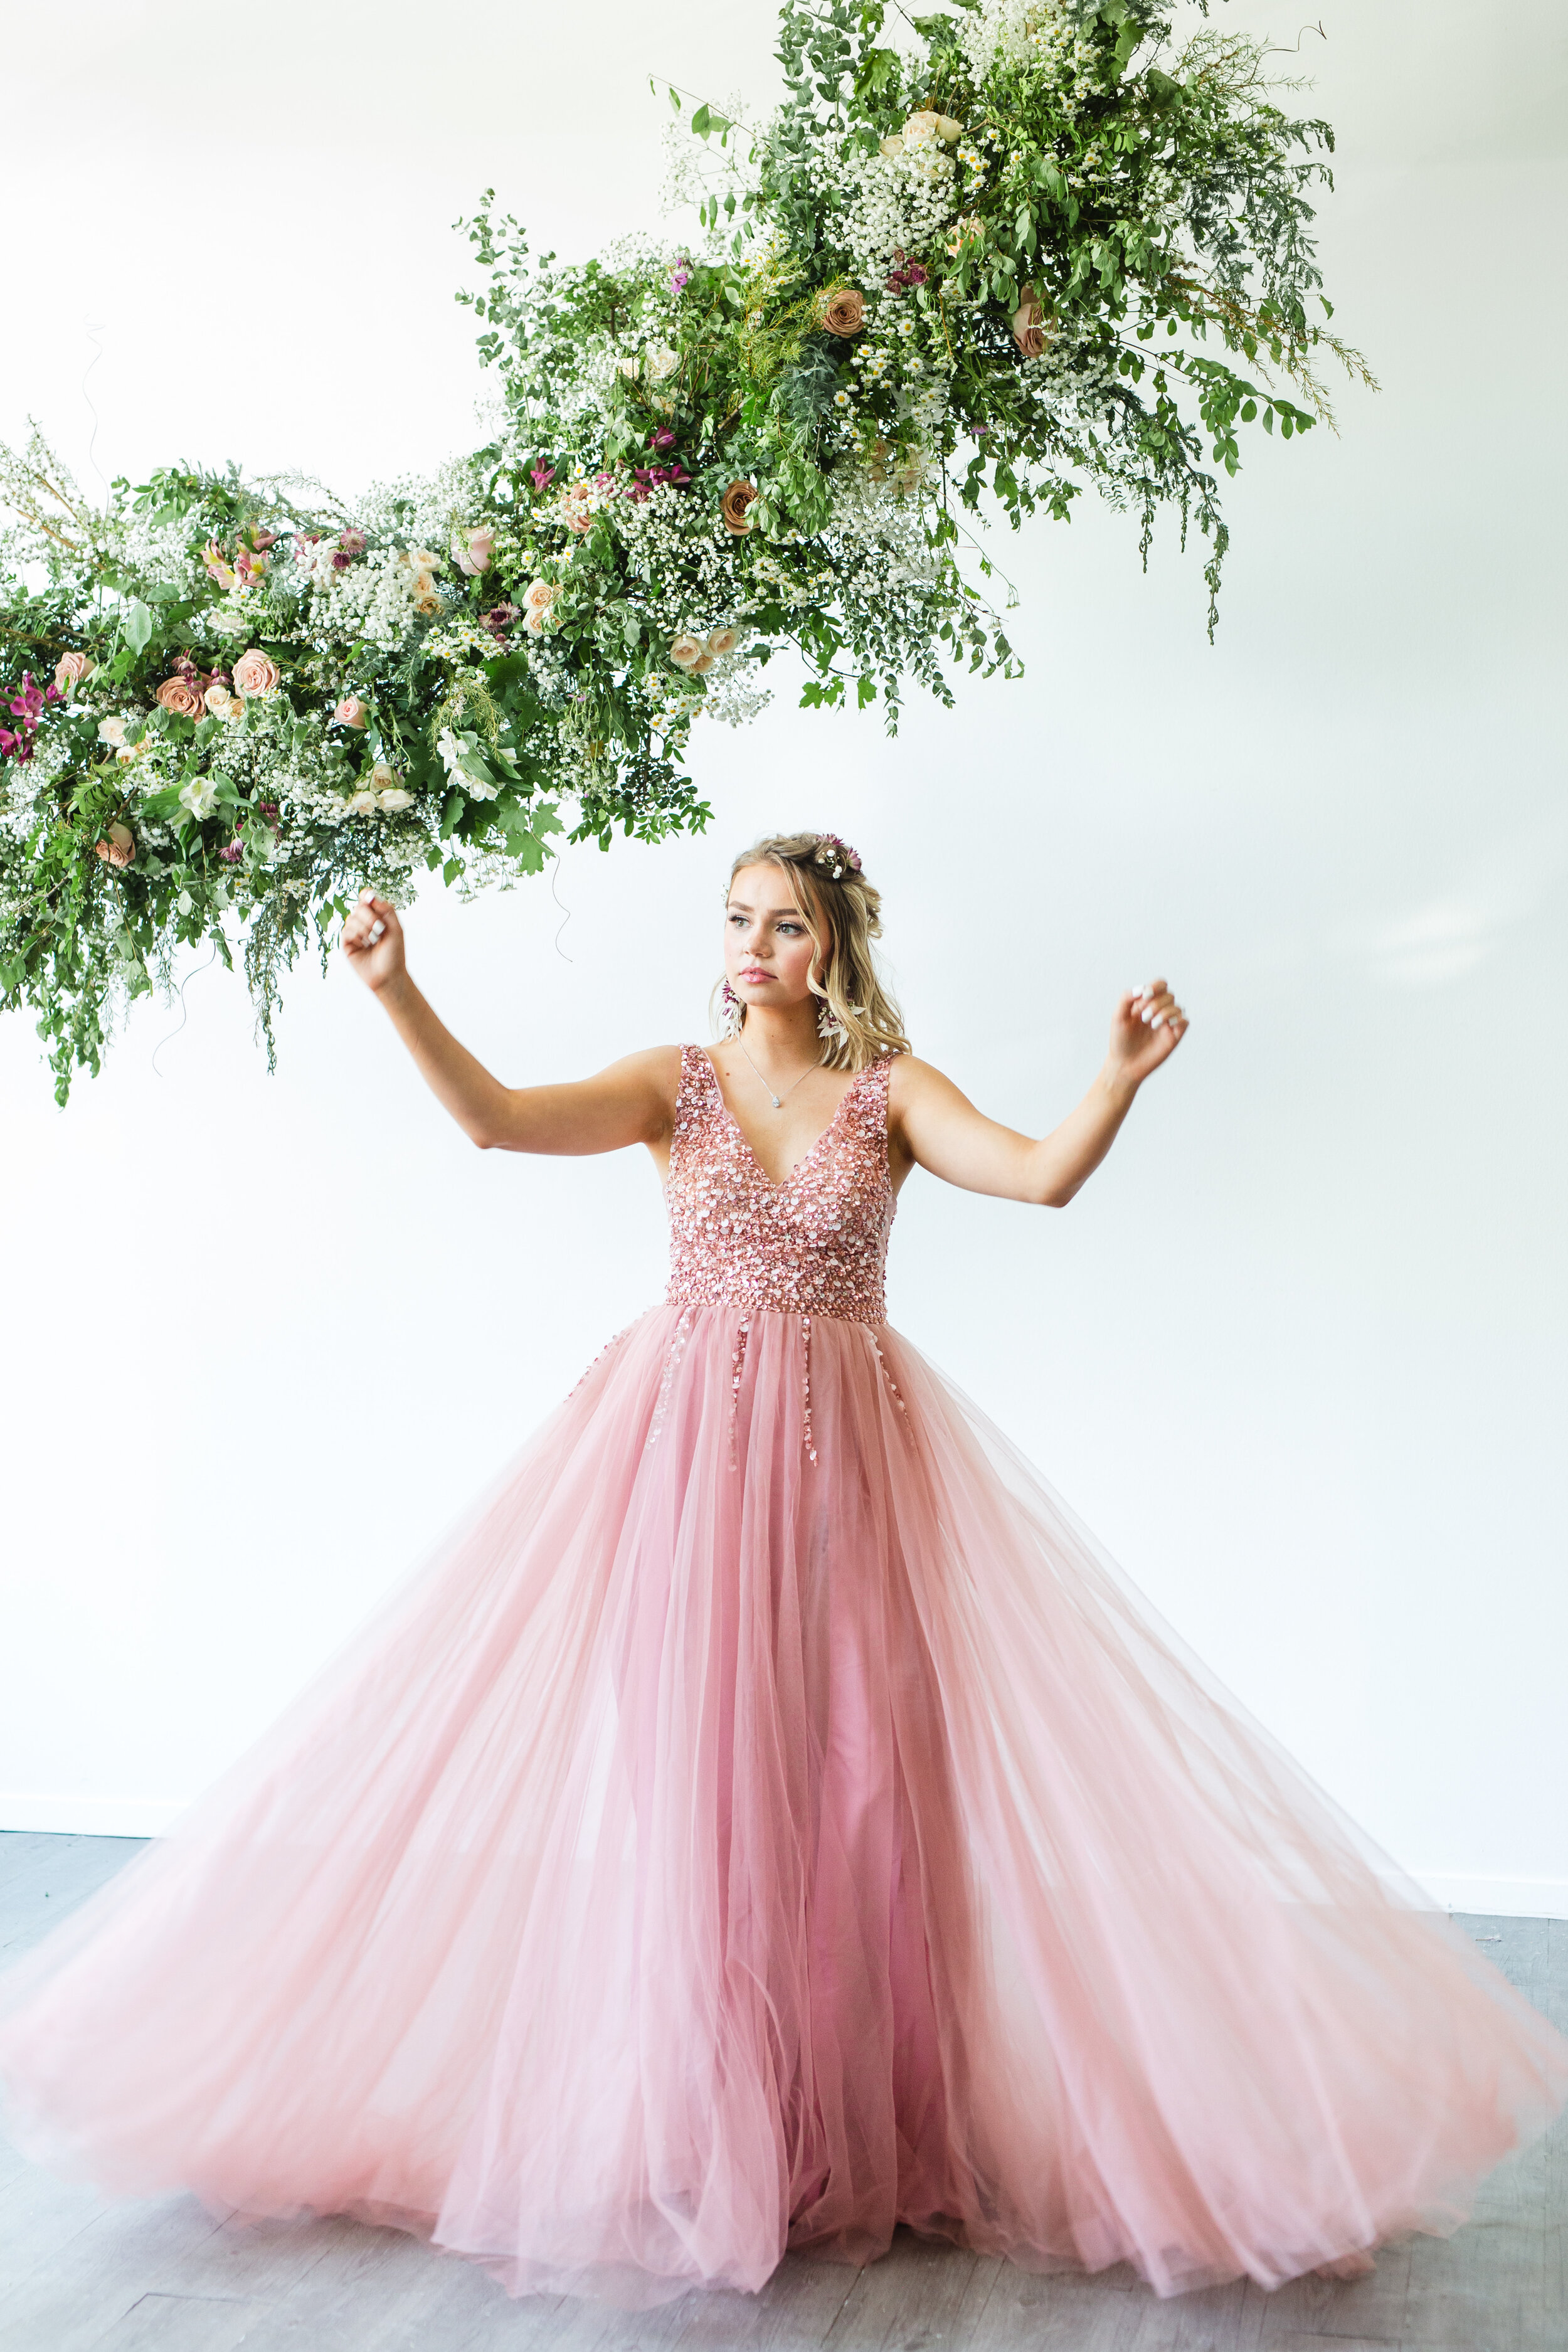  Logan, Utah’s Sweet Afton Floral created ornate wine red and green hanging floral installment for this stylized shoot. professional cache valley utah event floral designer, floral design installment, pink prom dress, pink v-neck gala dress, braided 